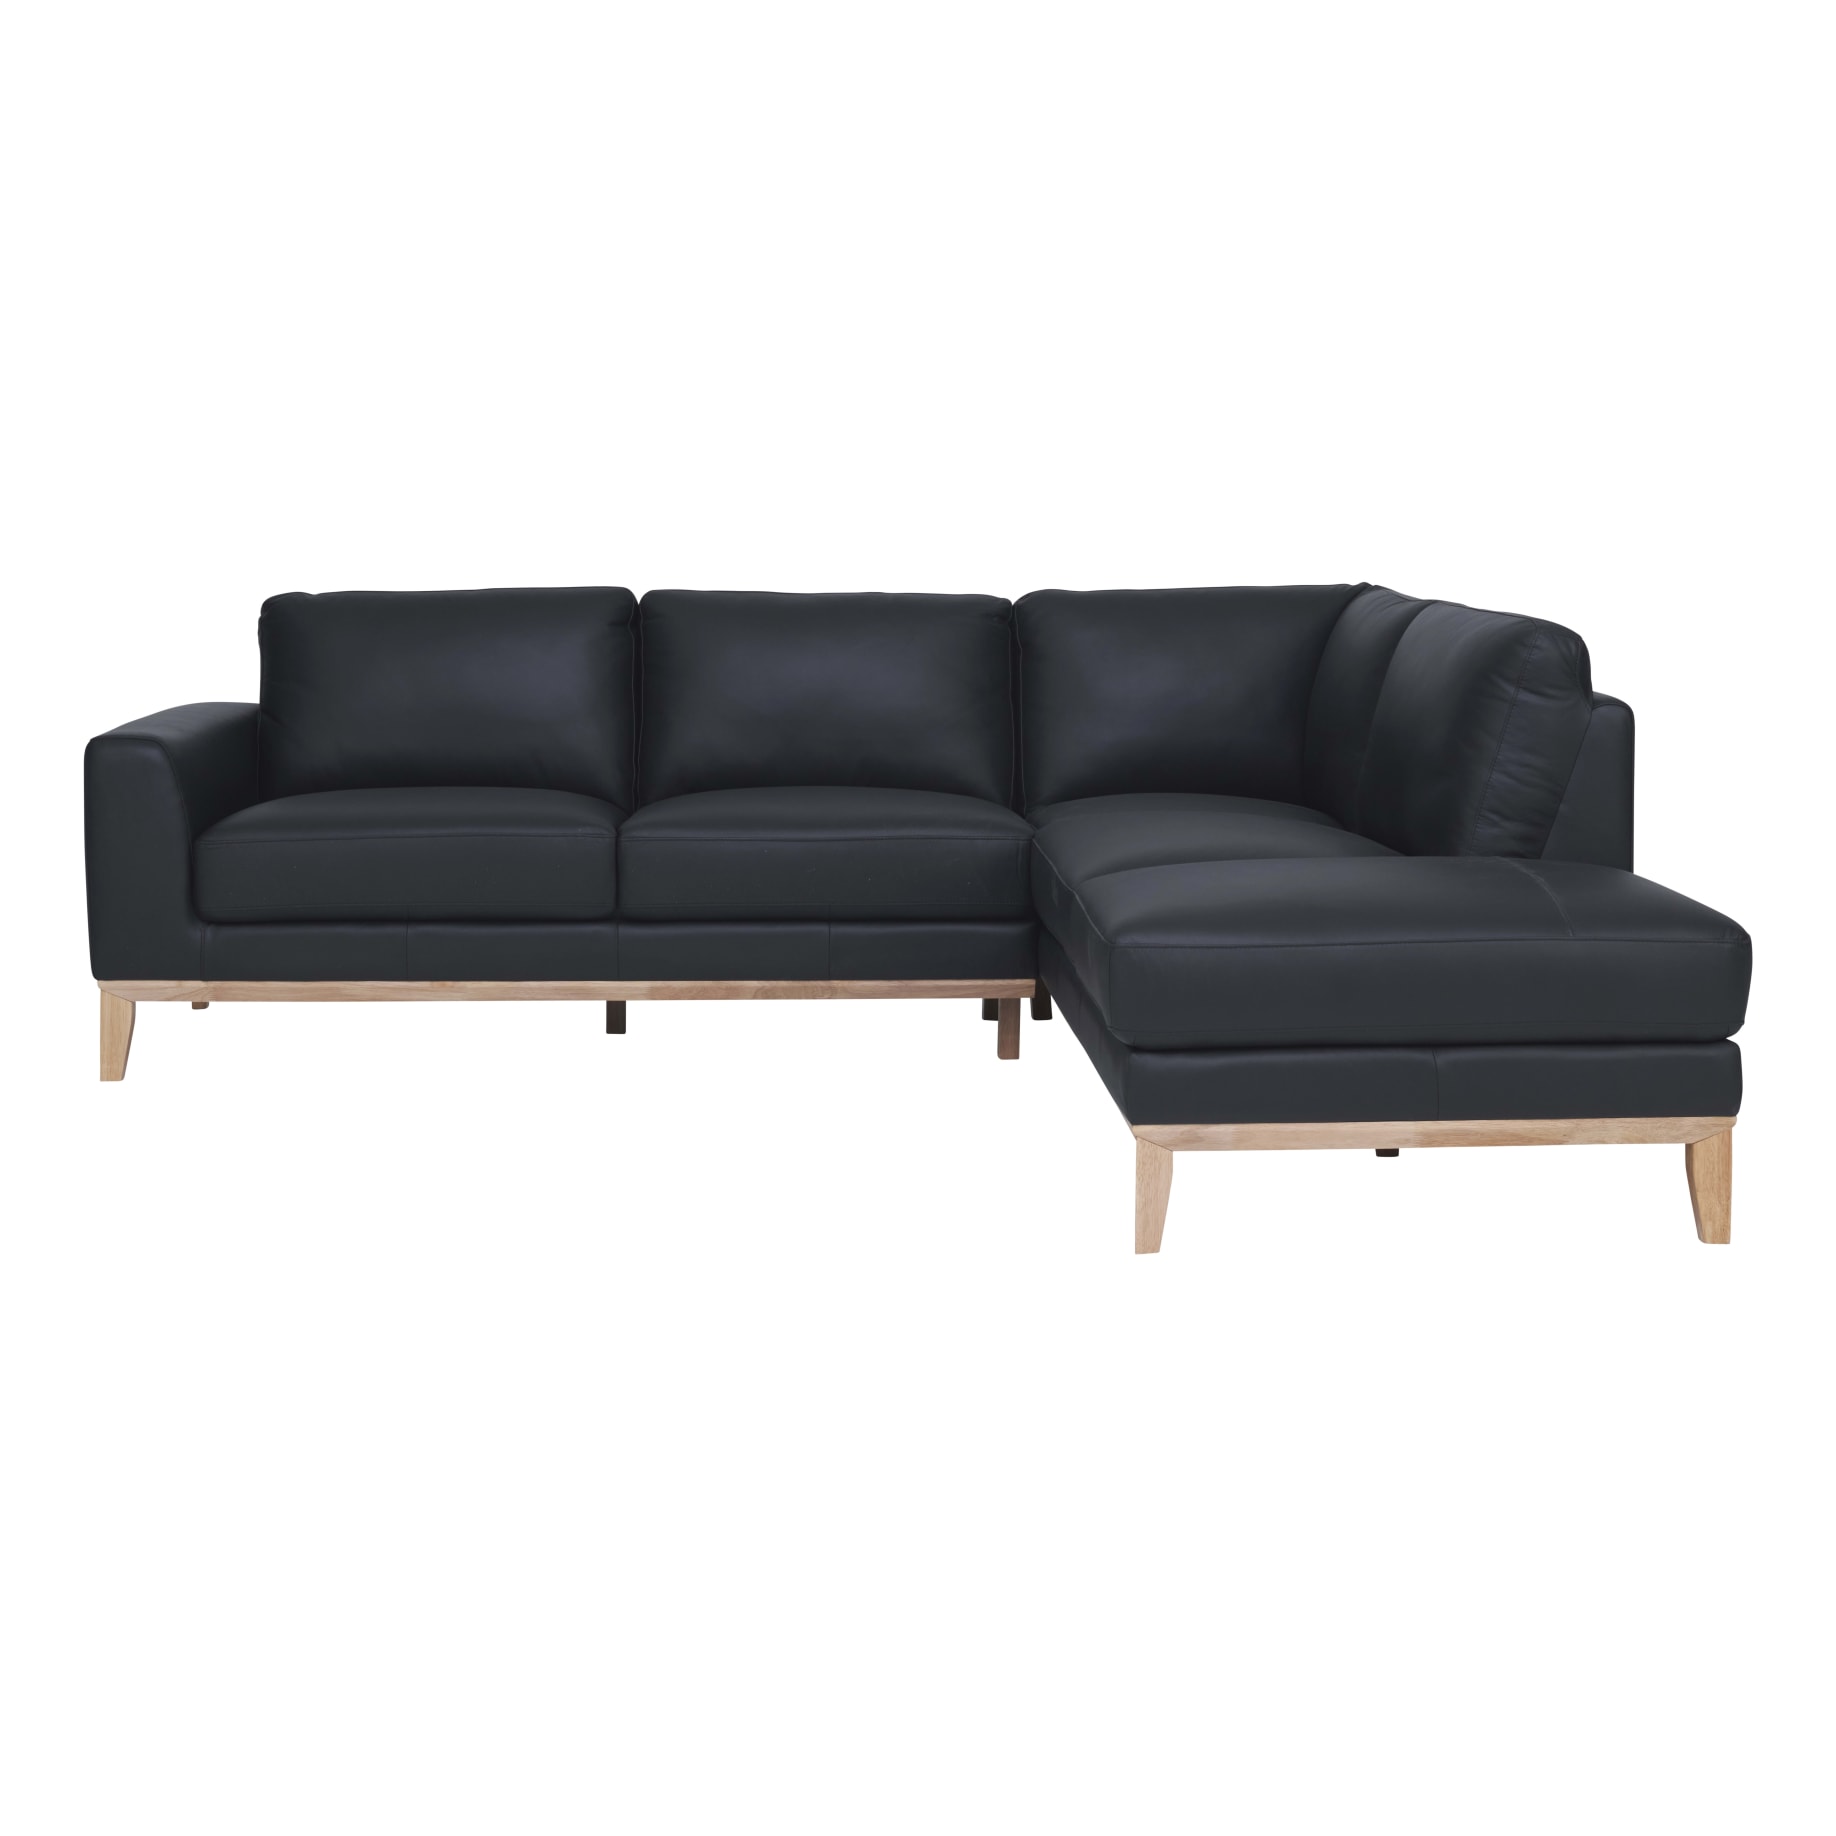 Dante 2.5 Seater Sofa + Chaise RHF in Leather Black